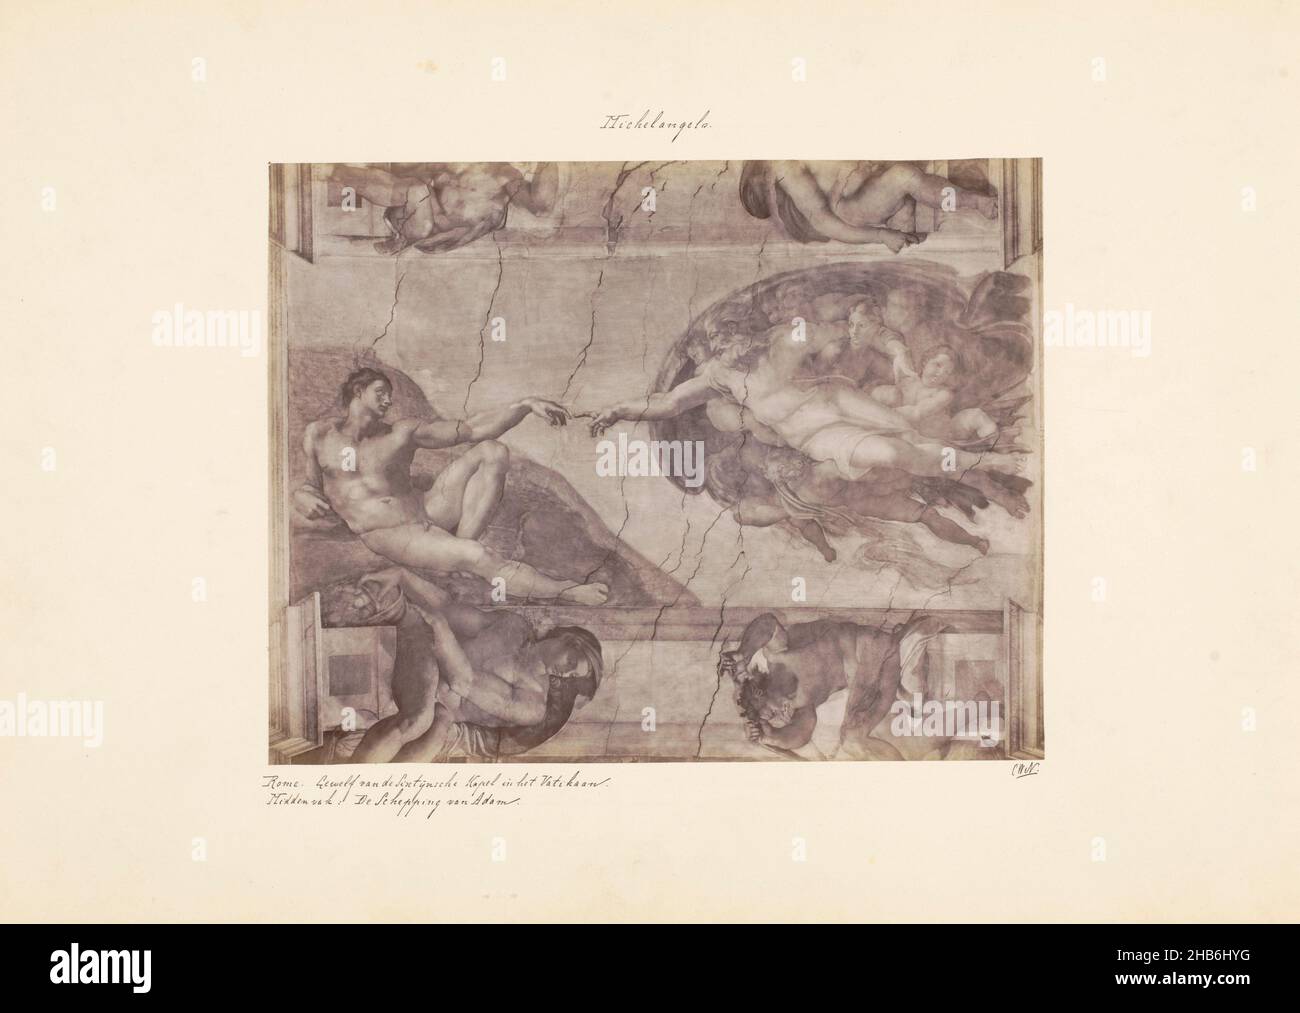 Photoreproduction of the fresco The Creation of Adam, painted by Michelangeo in the Sistine Chapel in Rome, Michelangelo. Rome. Vault of the Sistine Chapel in the Vatican. Middle section: The Creation of Adam. (title on object), anonymous, Michelangelo, Sixtijnse kapel (Vaticaan), c. 1875 - c. 1900, cardboard, albumen print, height 190 mm × width 245 mm Stock Photo